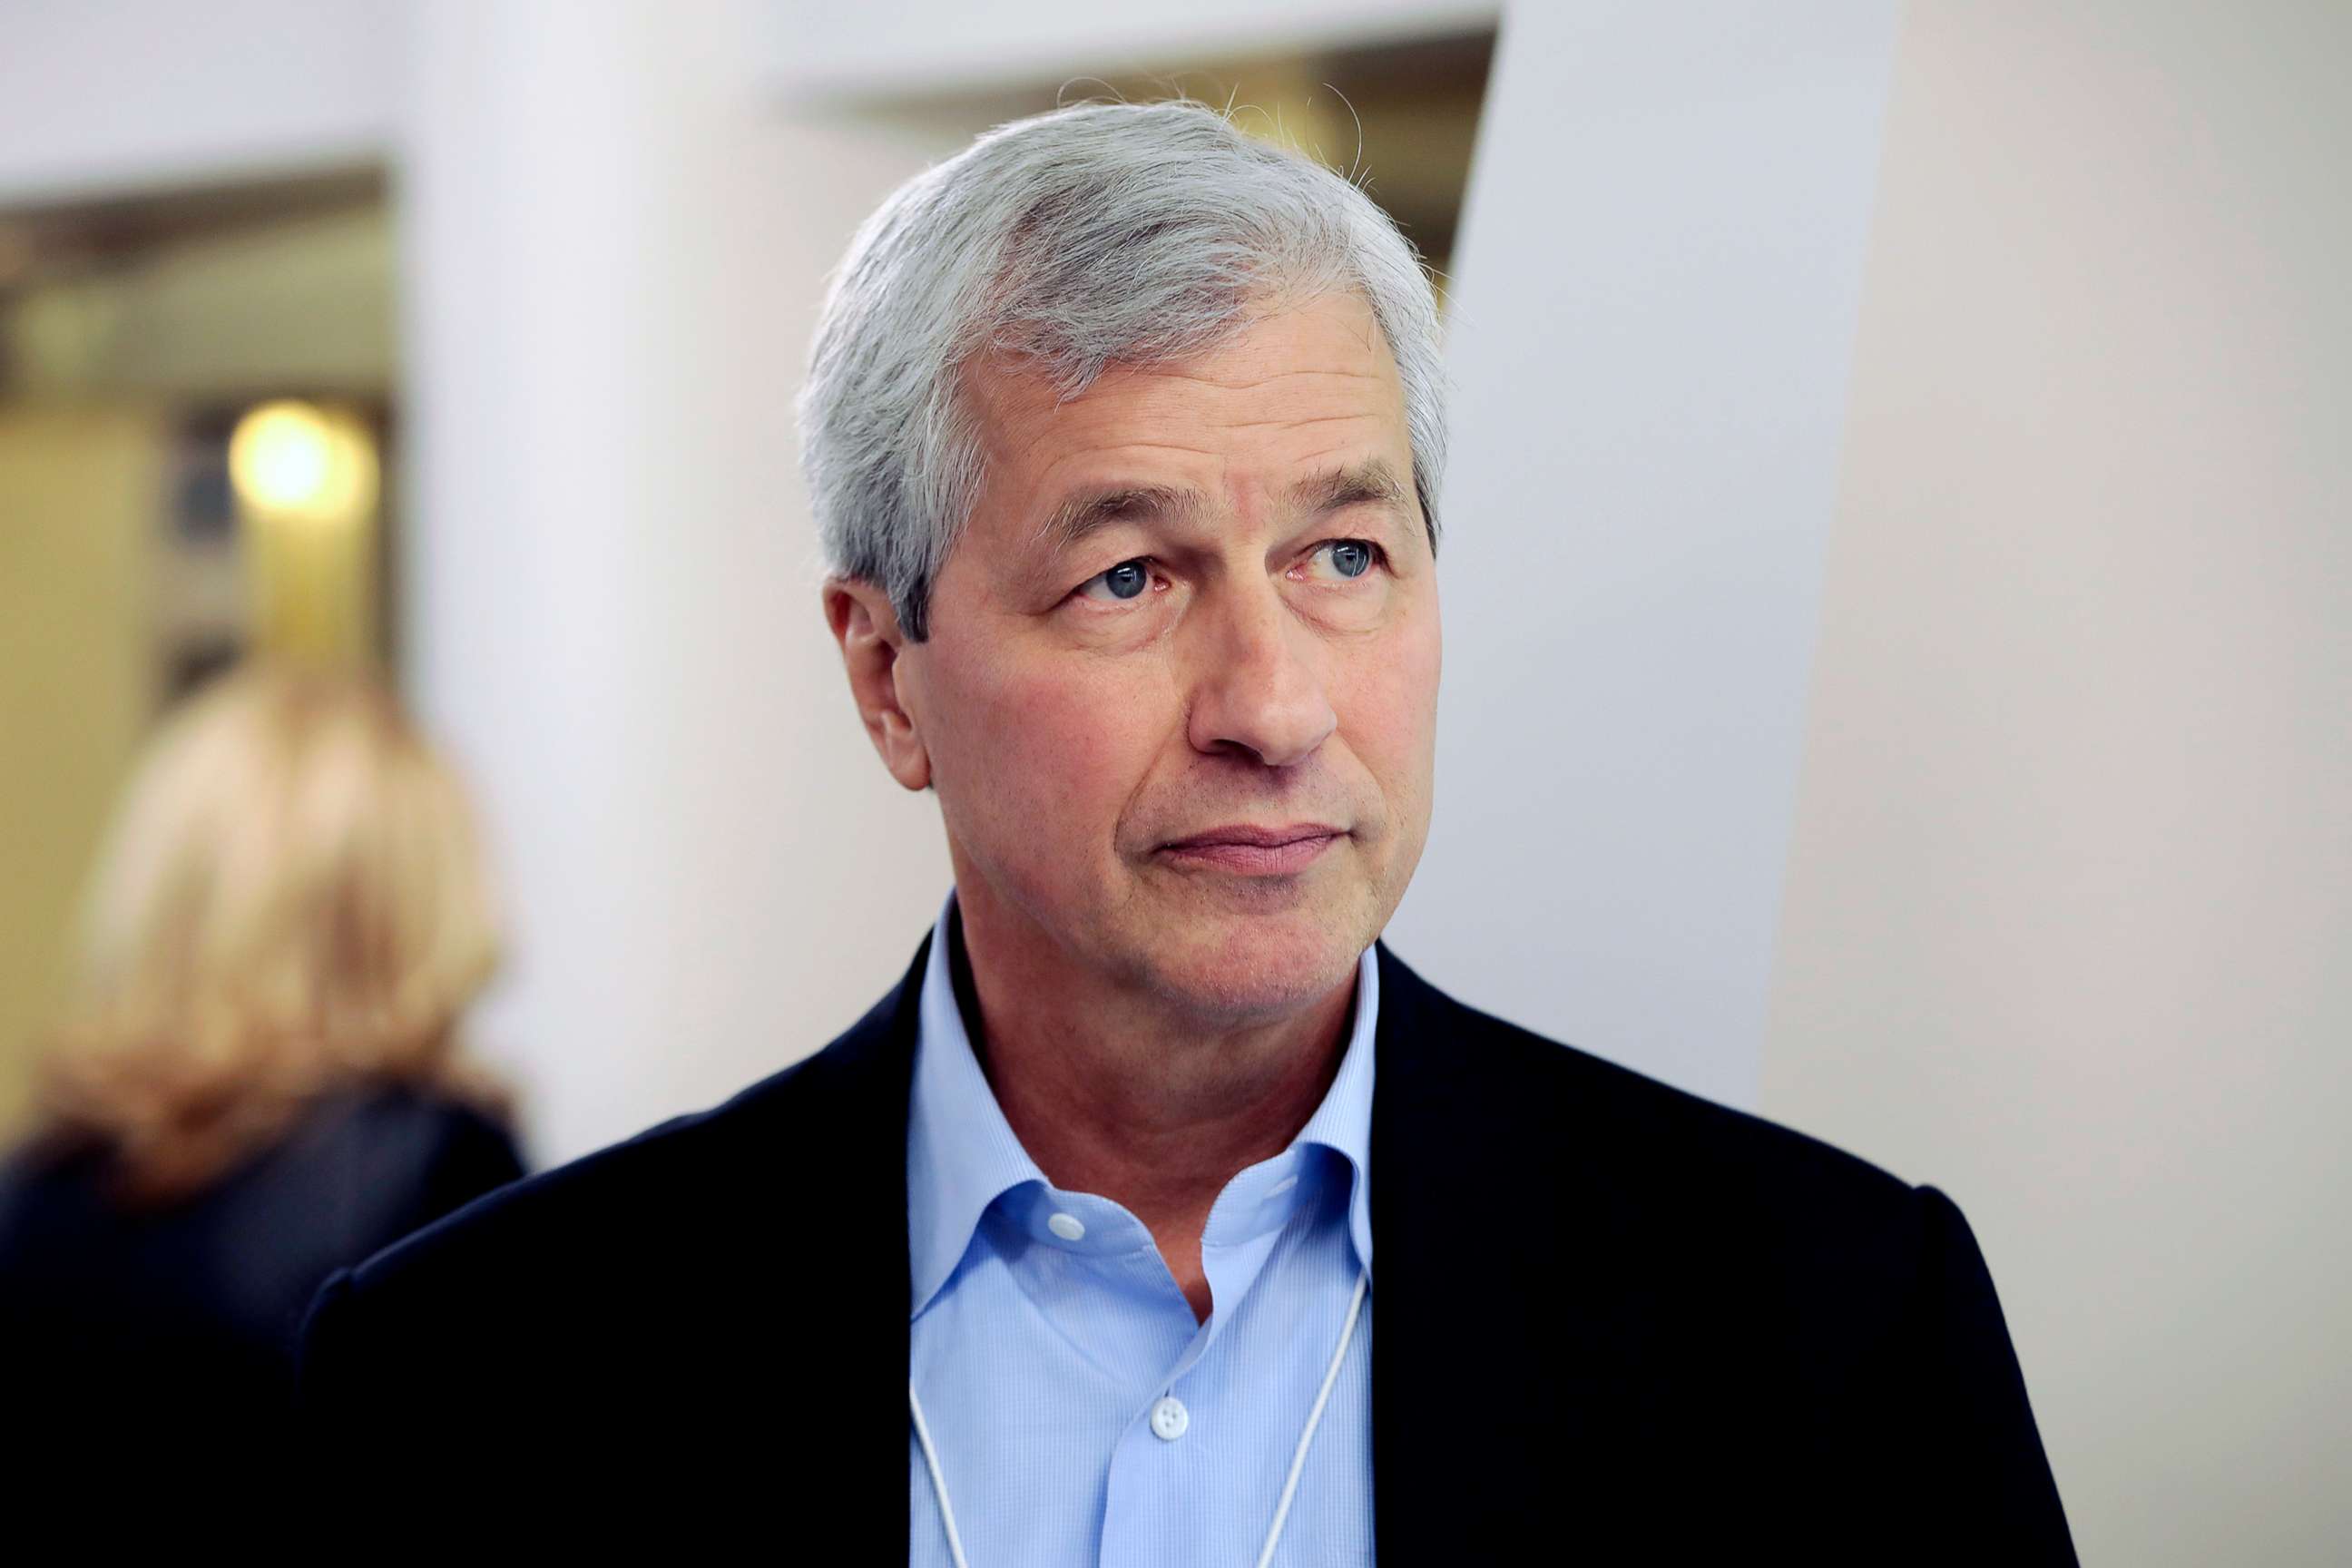 PHOTO: James Dimon, CEO of JPMorgan Chase & Co.,  during the World Economic Forum in Davos, Switzerland, in this Jan. 18, 2017 file photo.